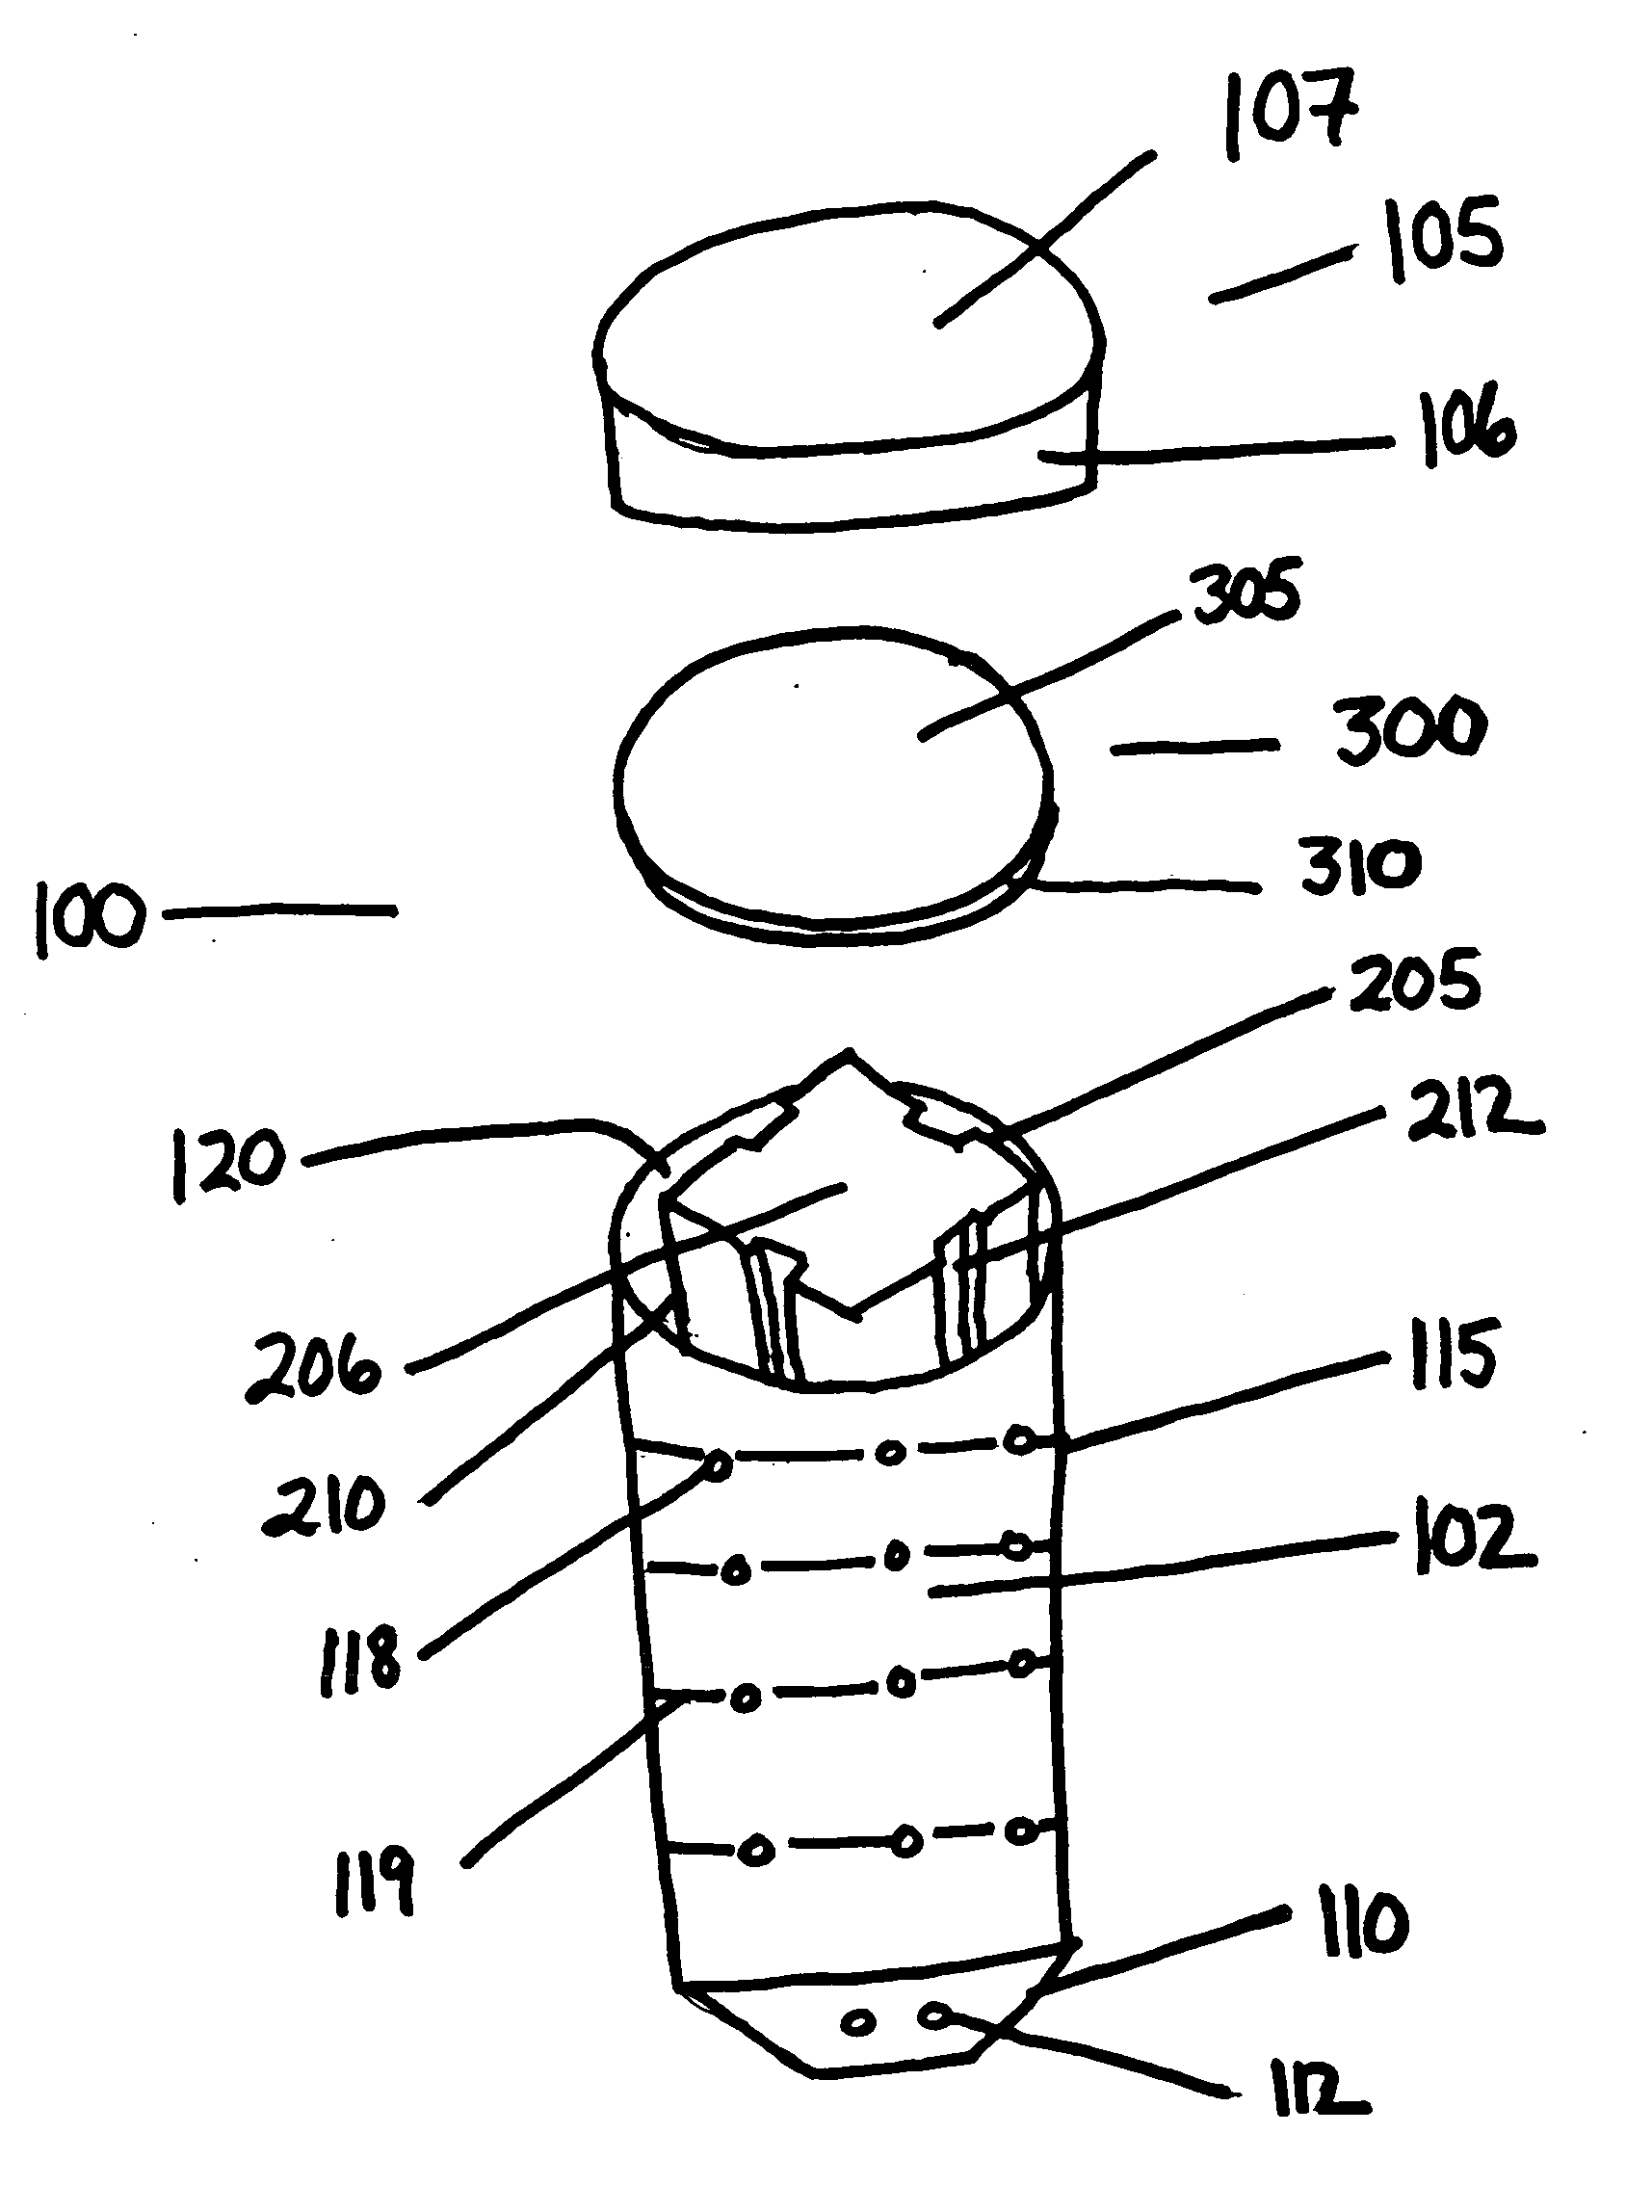 Devices and methods for monitoring and/or controlling arthropods